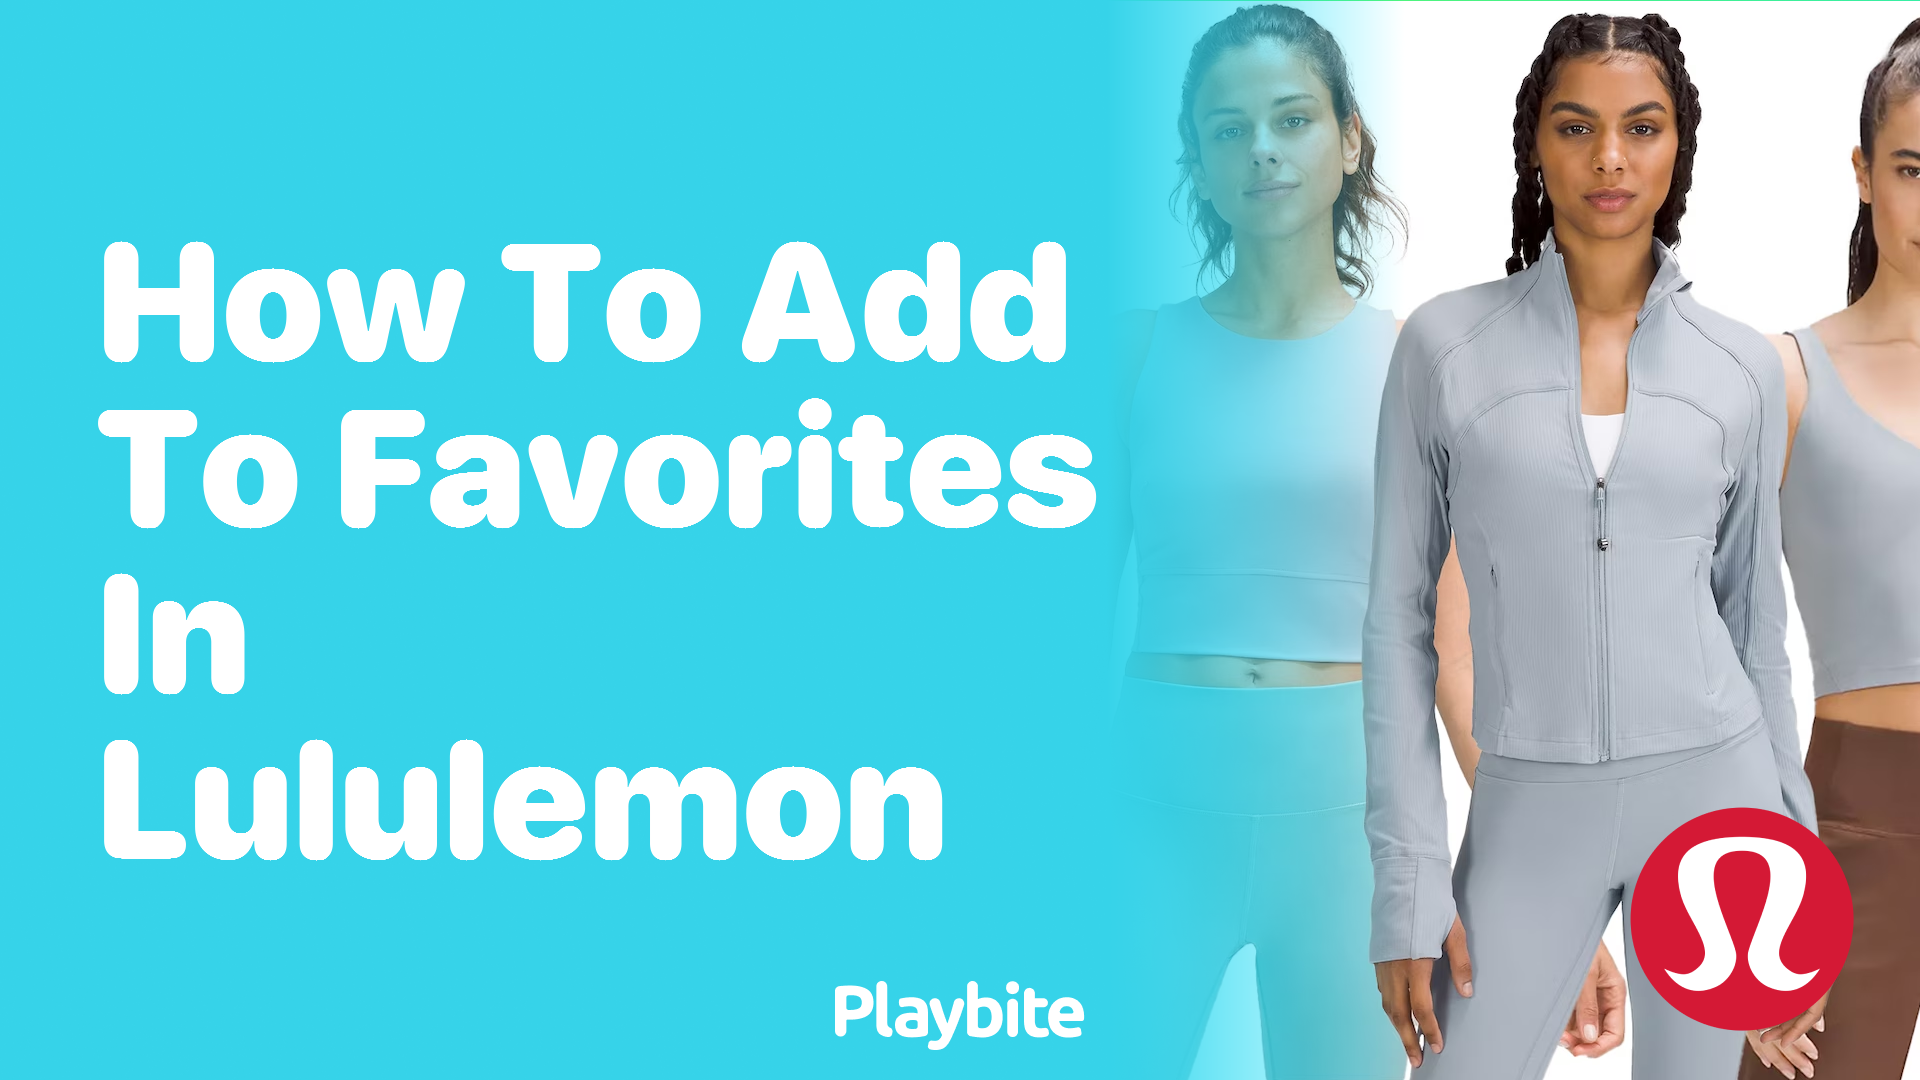 How to Add to Favorites in Lululemon: A Quick Guide - Playbite